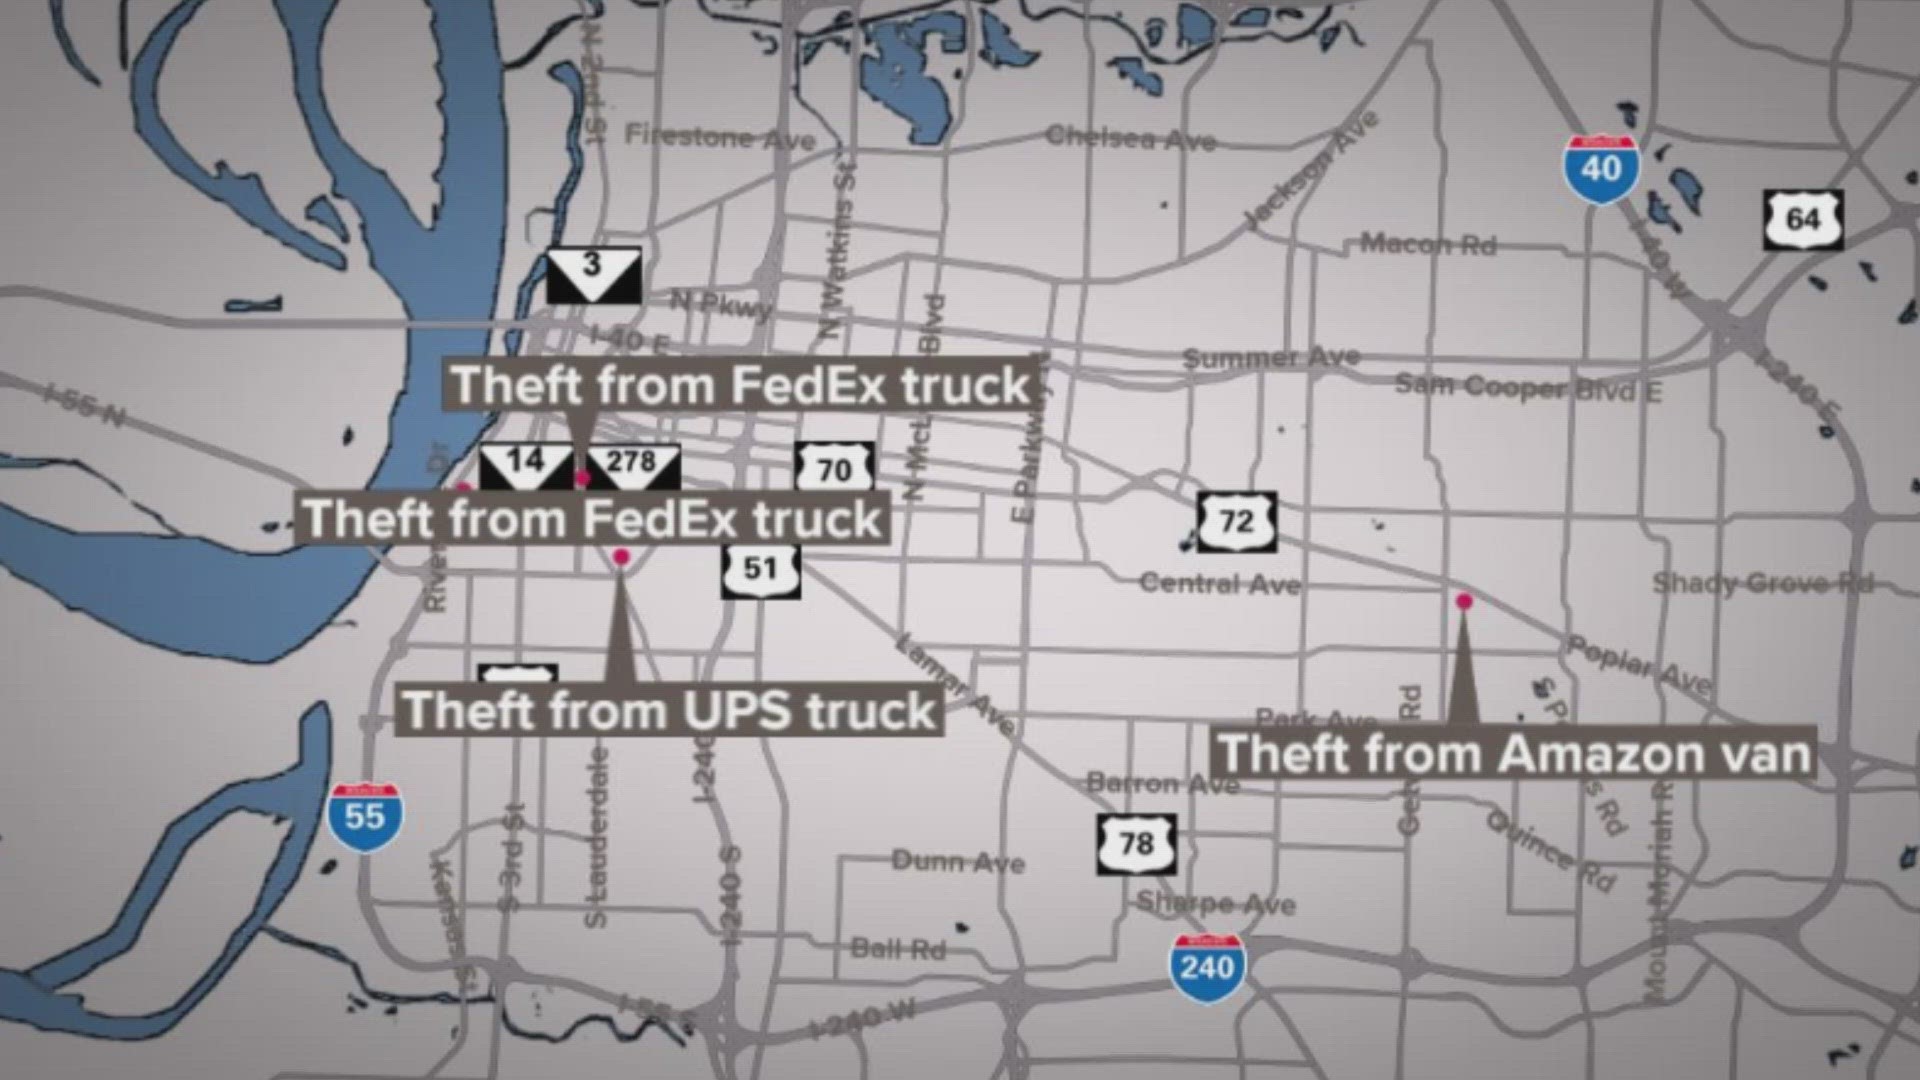 Police said at least four different delivery trucks have been hit over a two day period.